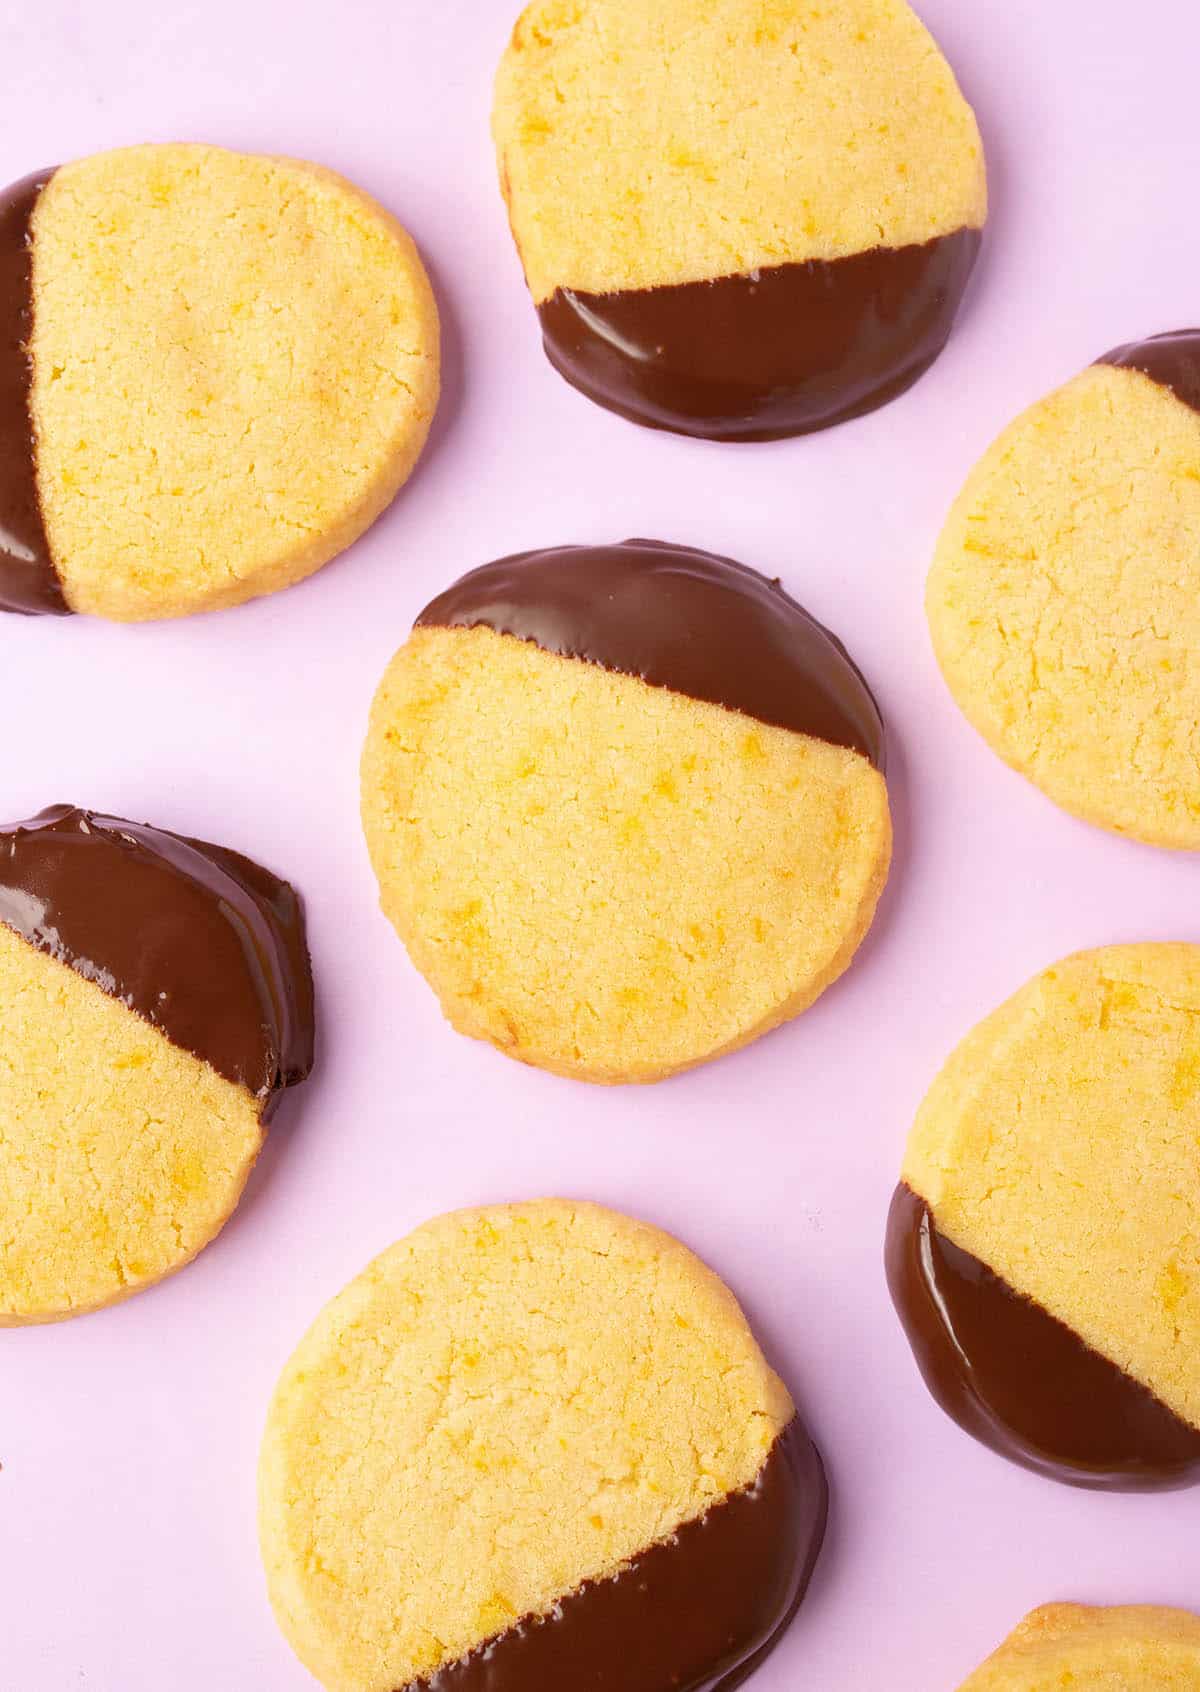 Top view of buttery Orange Cookies dipped in dark chocolate on a purple backdrop.